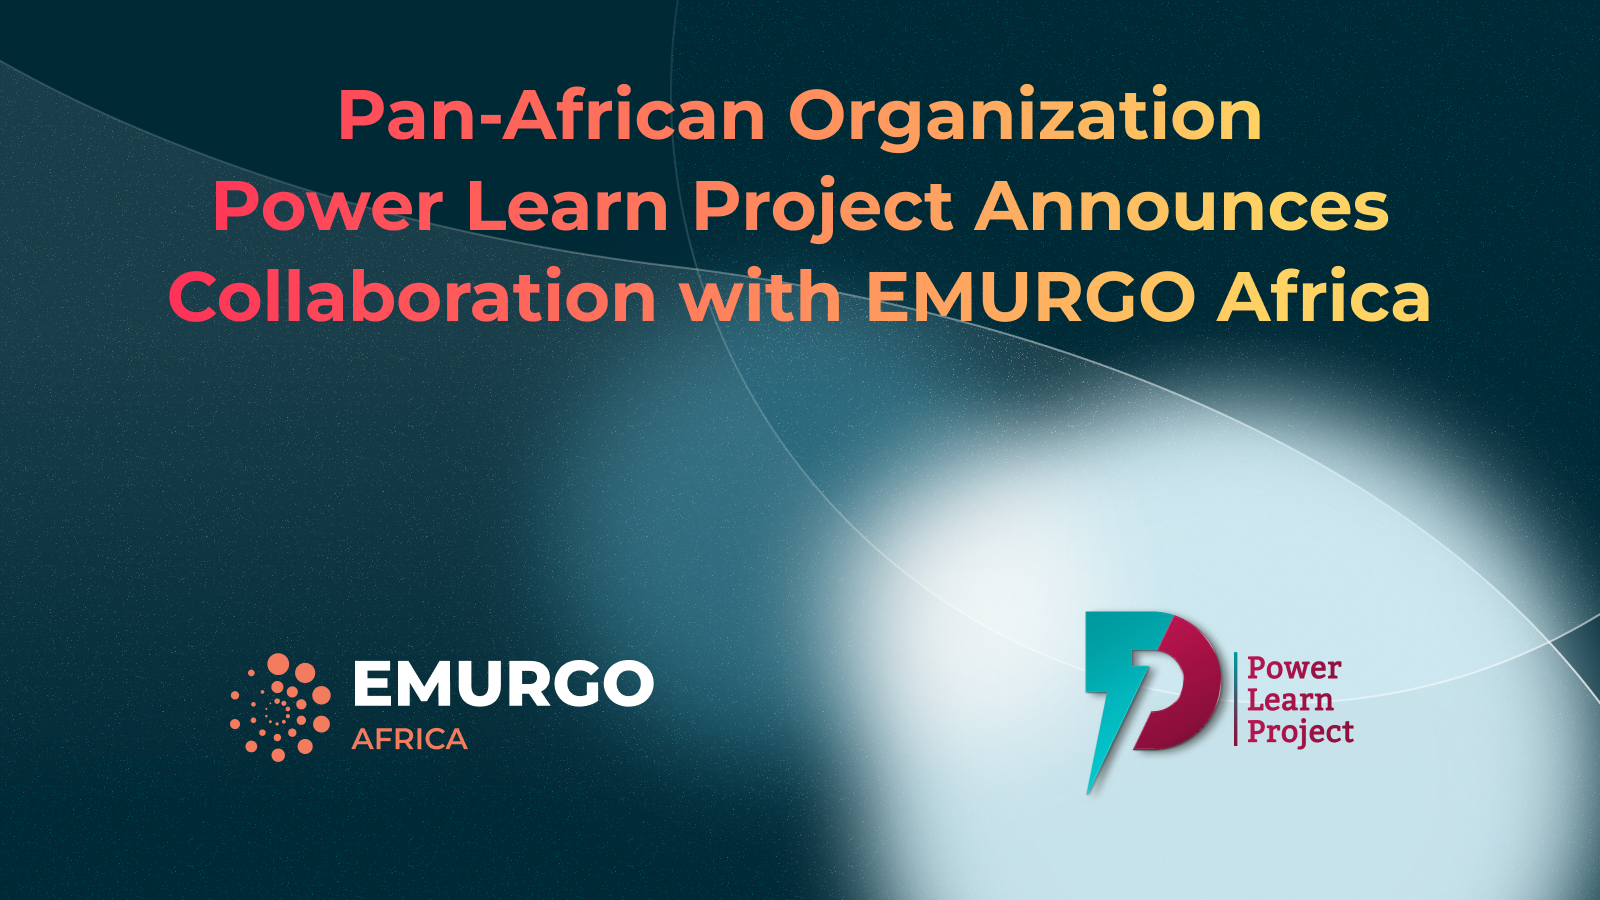 EMURGO-Africa-Power-Learn-Project-Collaboration.png